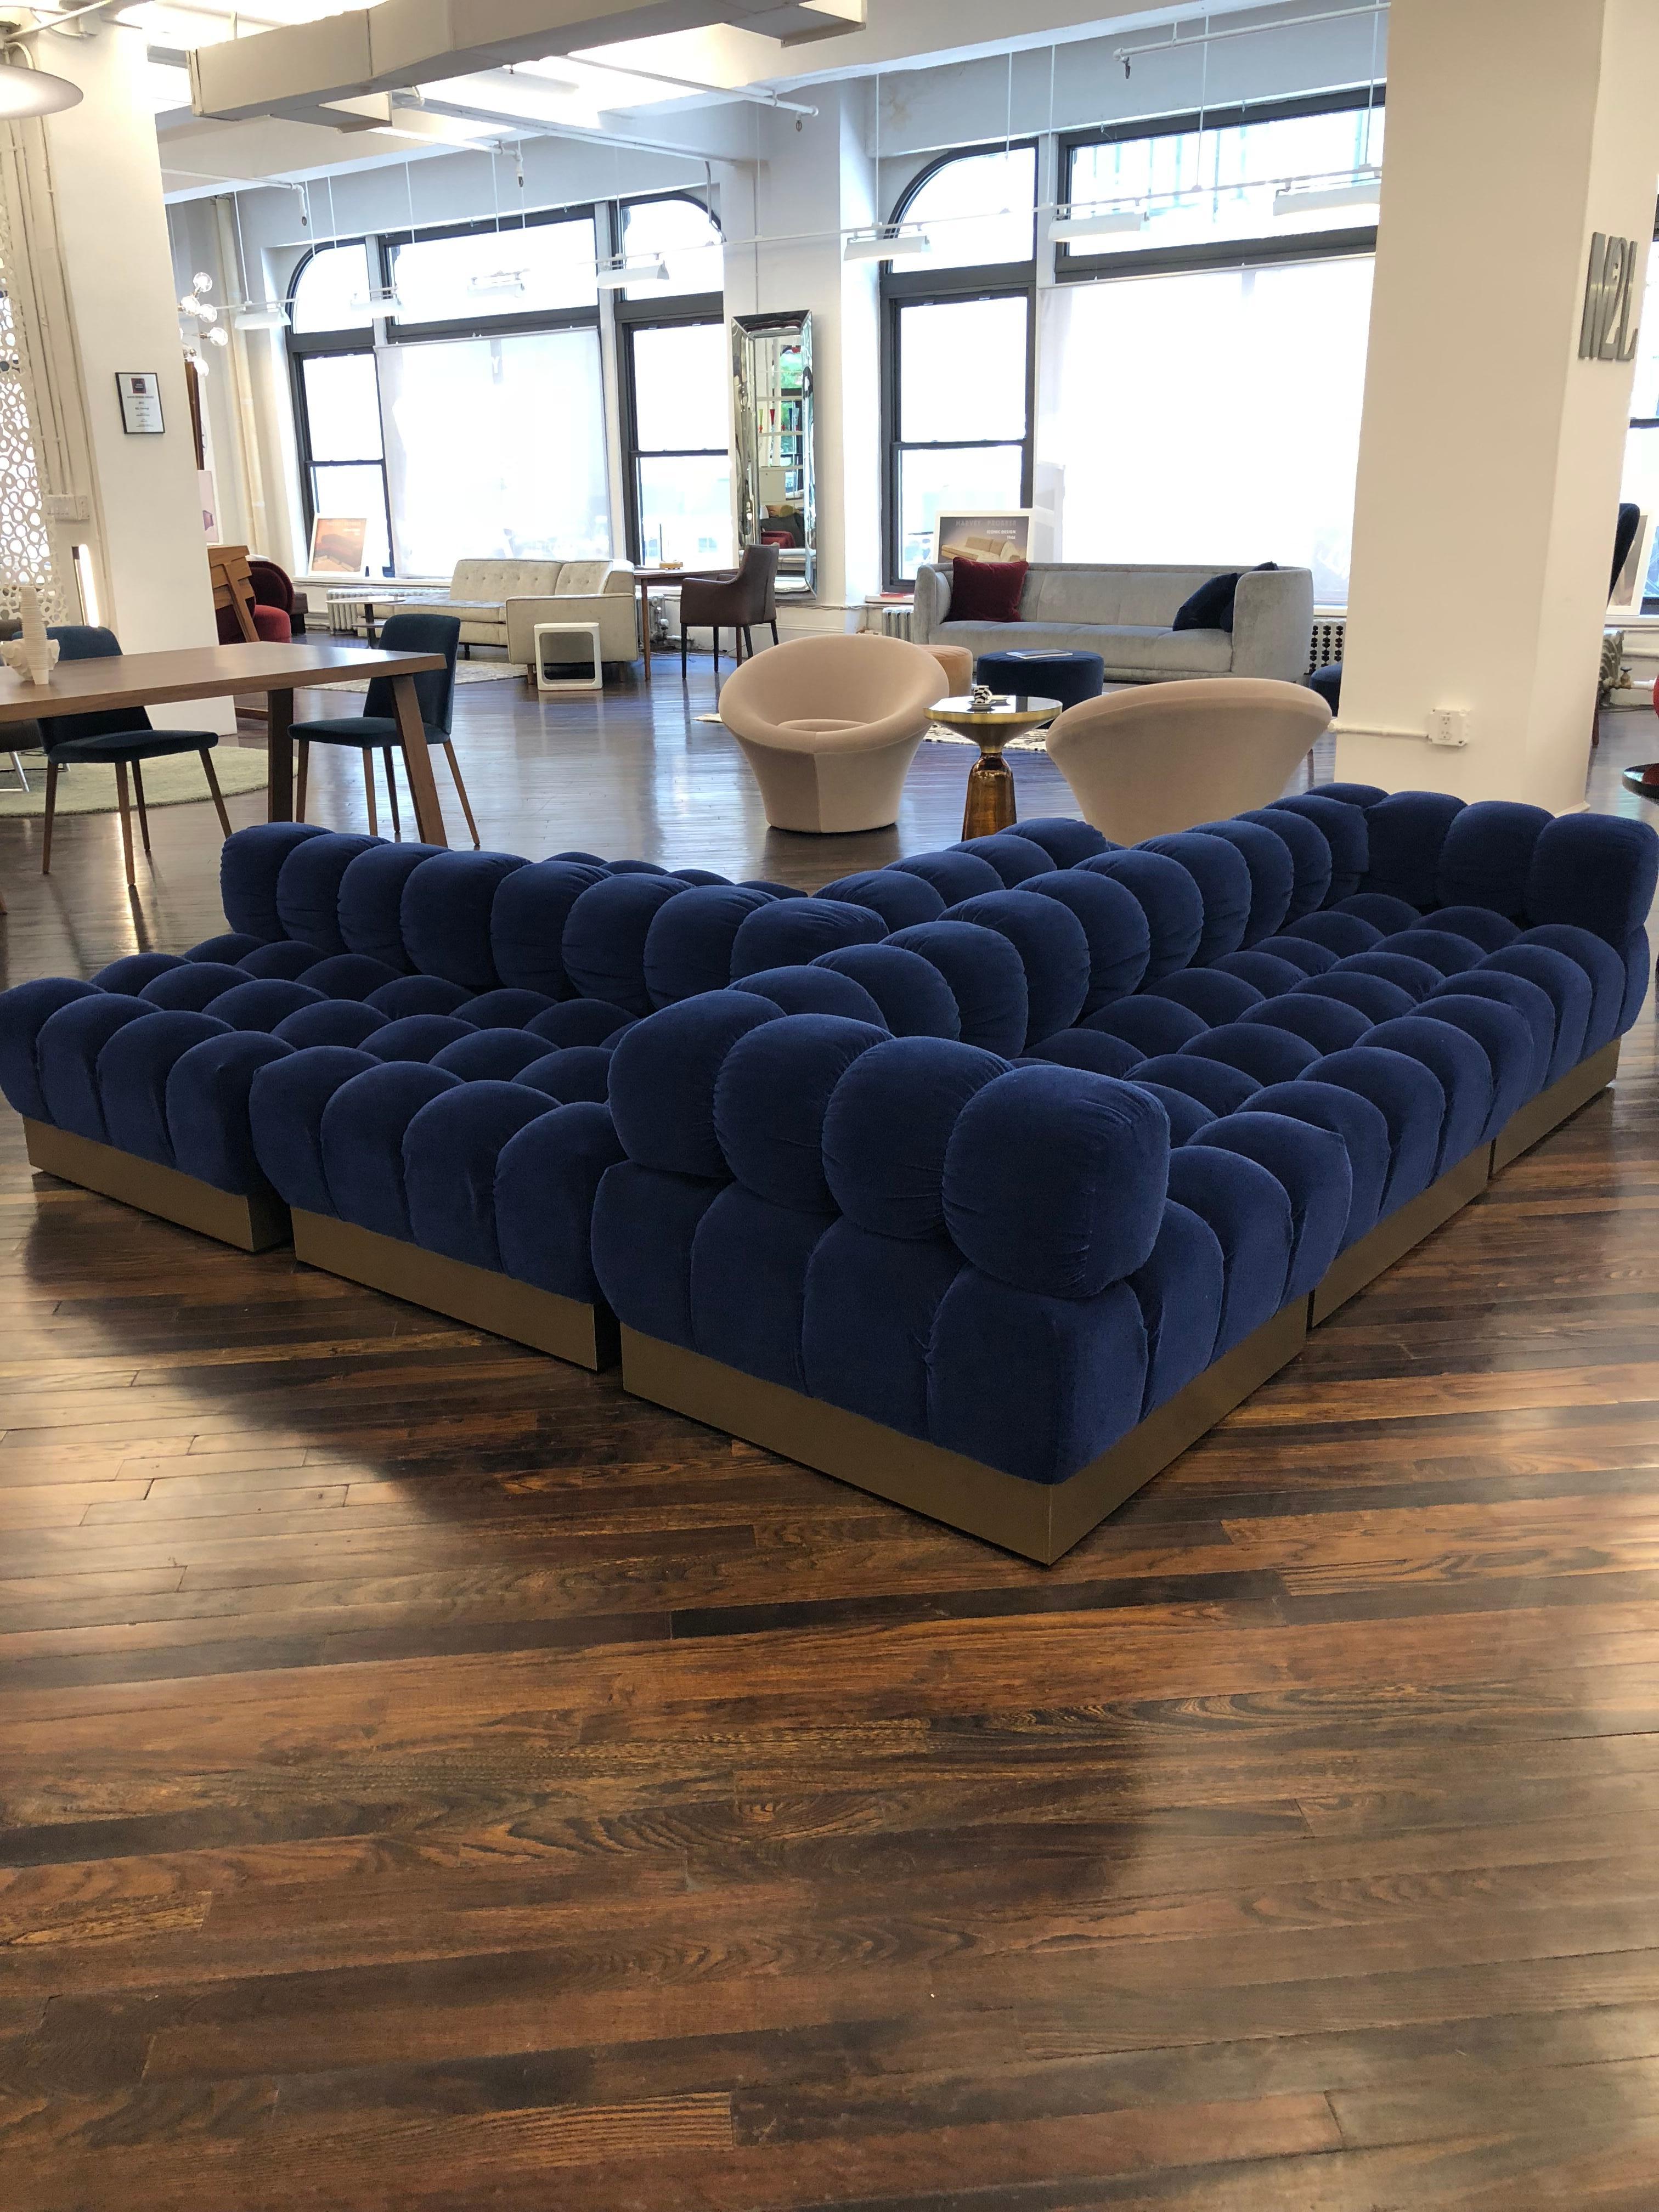 Harvey Probber deep tuft designed in 1972.
M2L is the exclusive licensee to produce and distribute Harvey Probber designs.
The deep tuft (eight) piece modular
Consists of:
(Two) HL5 ottomans, (four) HL6 backs, (two) HL7 corners
Measures: